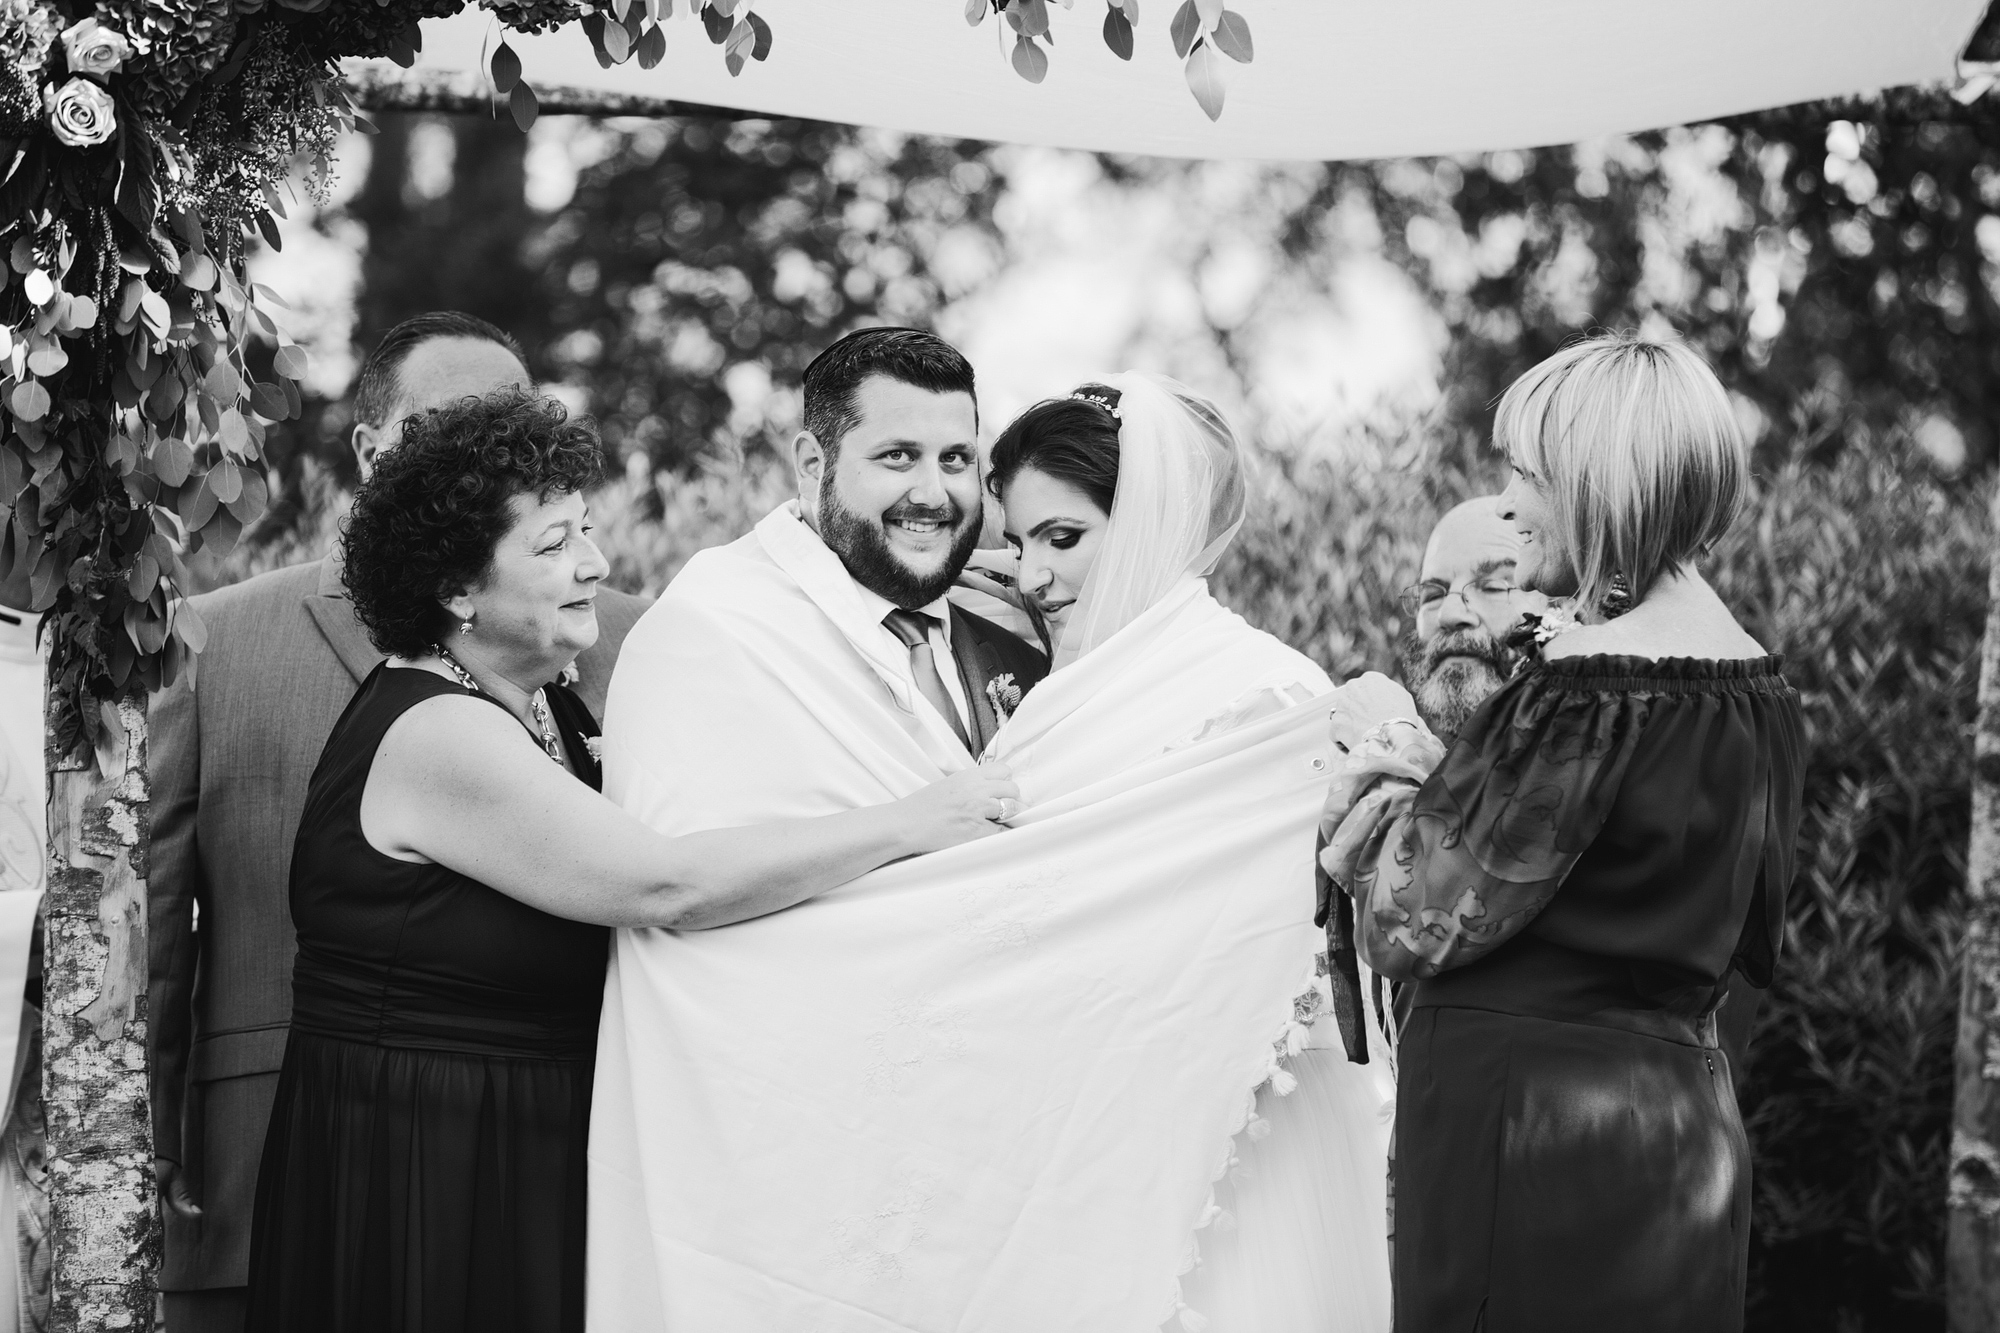 The couple wrapped in a prayer shawl. 